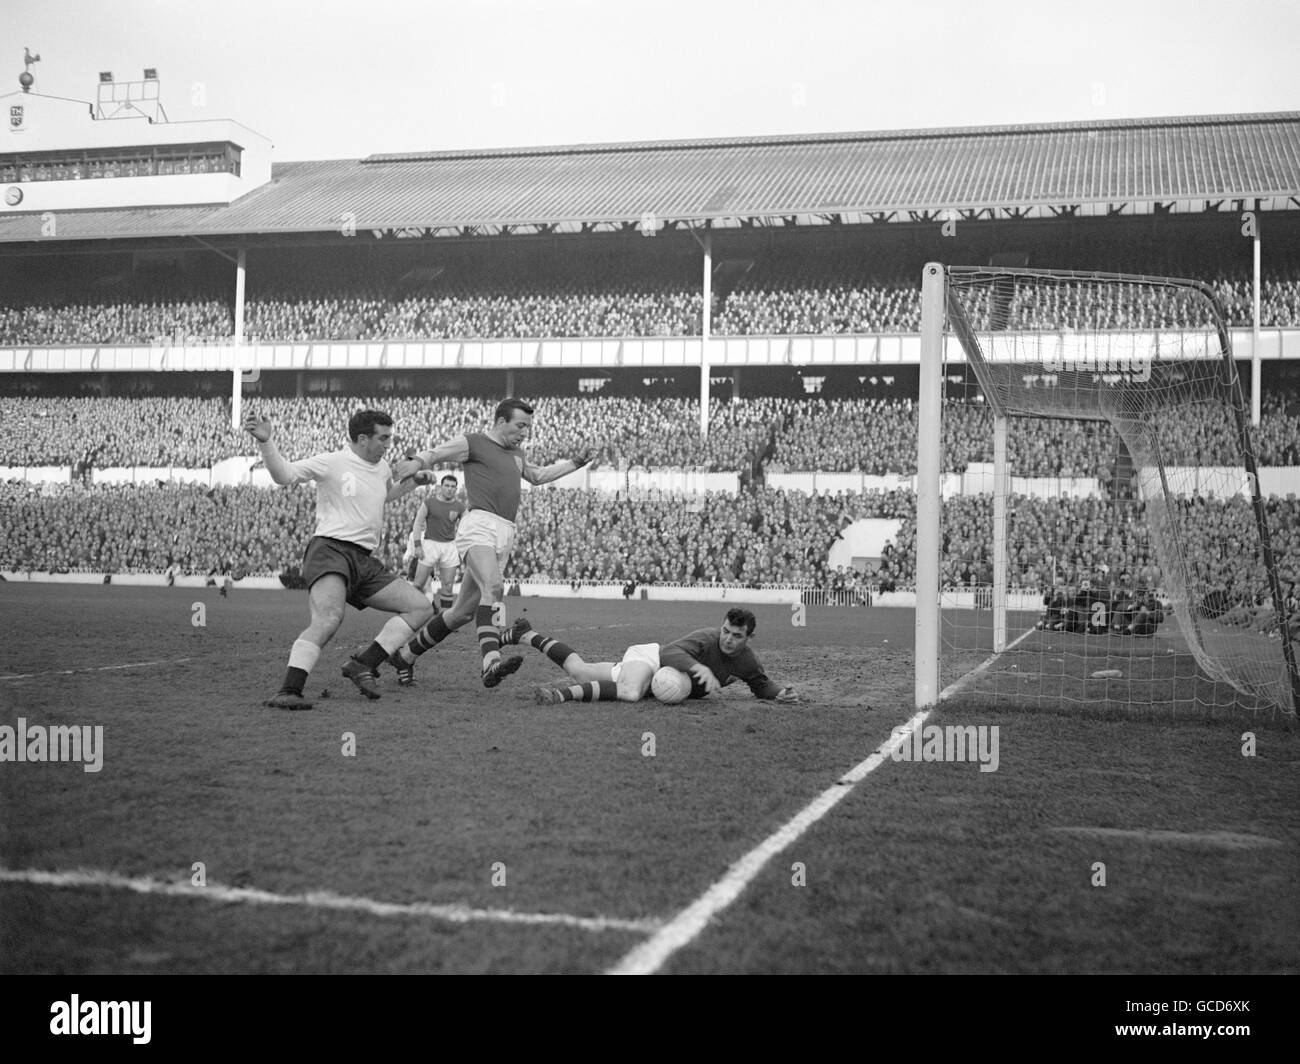 Adam Blacklaw, Burnley goalkeeper, saves the from Spurs' John Smith, and from his own centre half John Talbut. Stock Photo